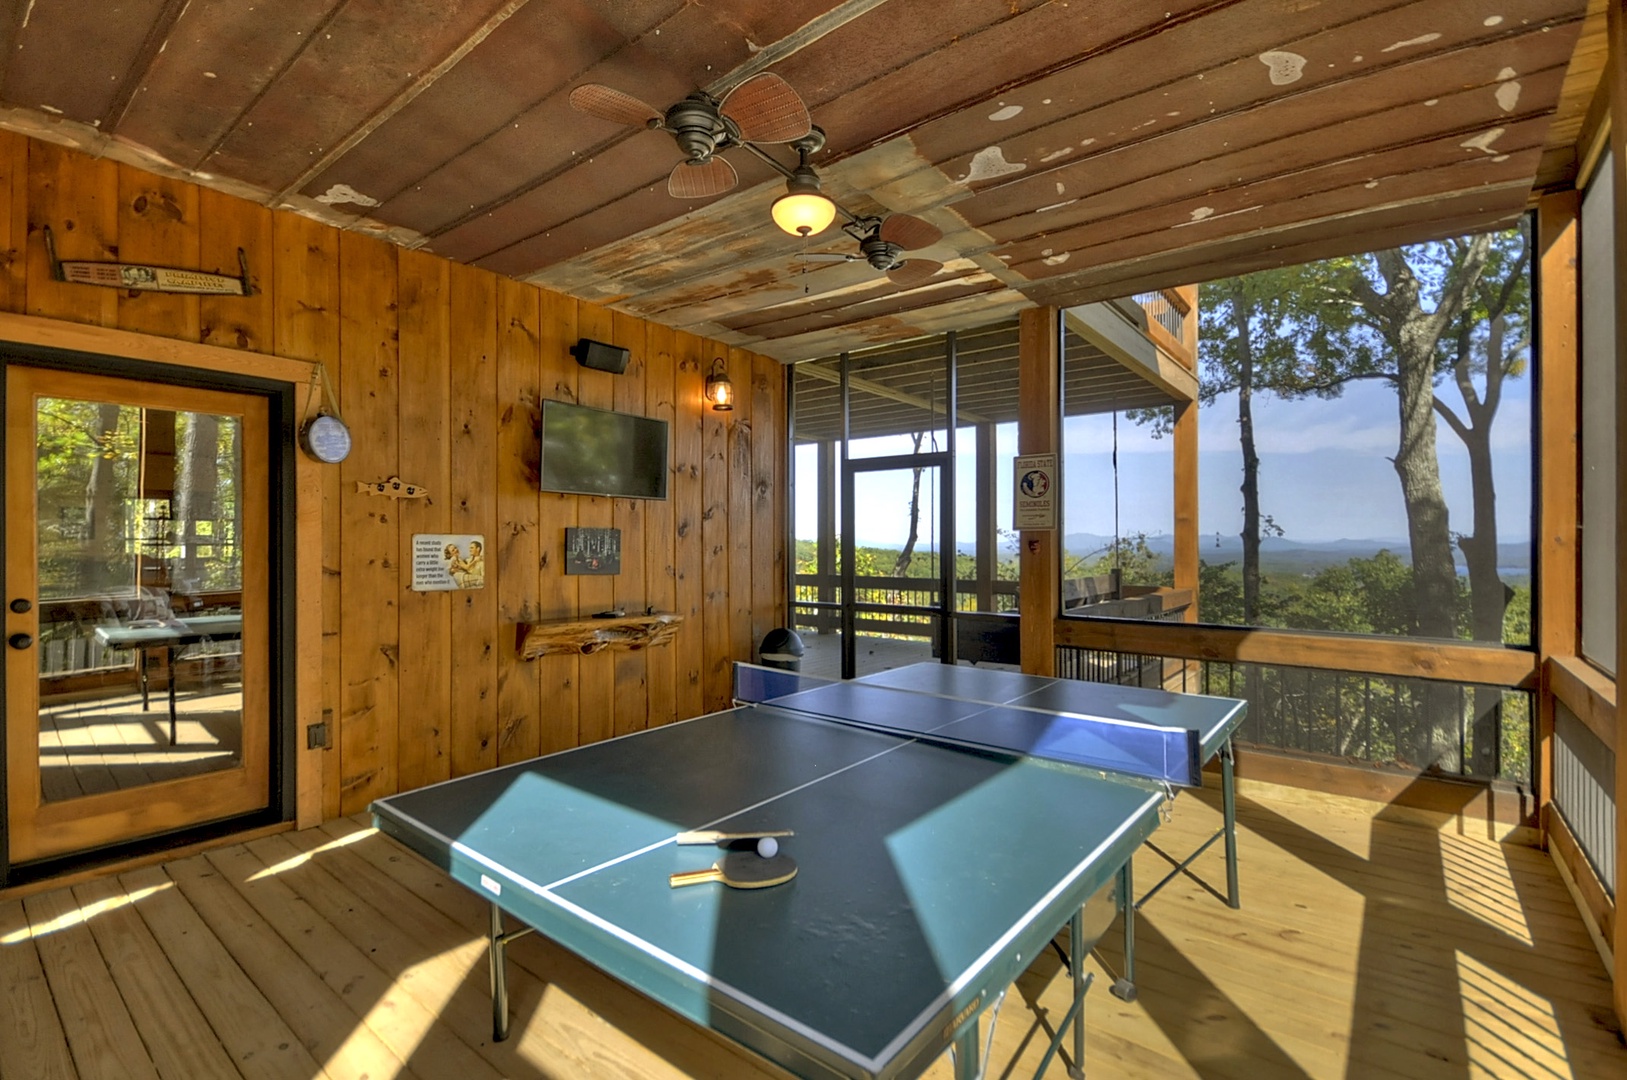 The Vue Over Blue Ridge- Screened in porch area with a ping pong table